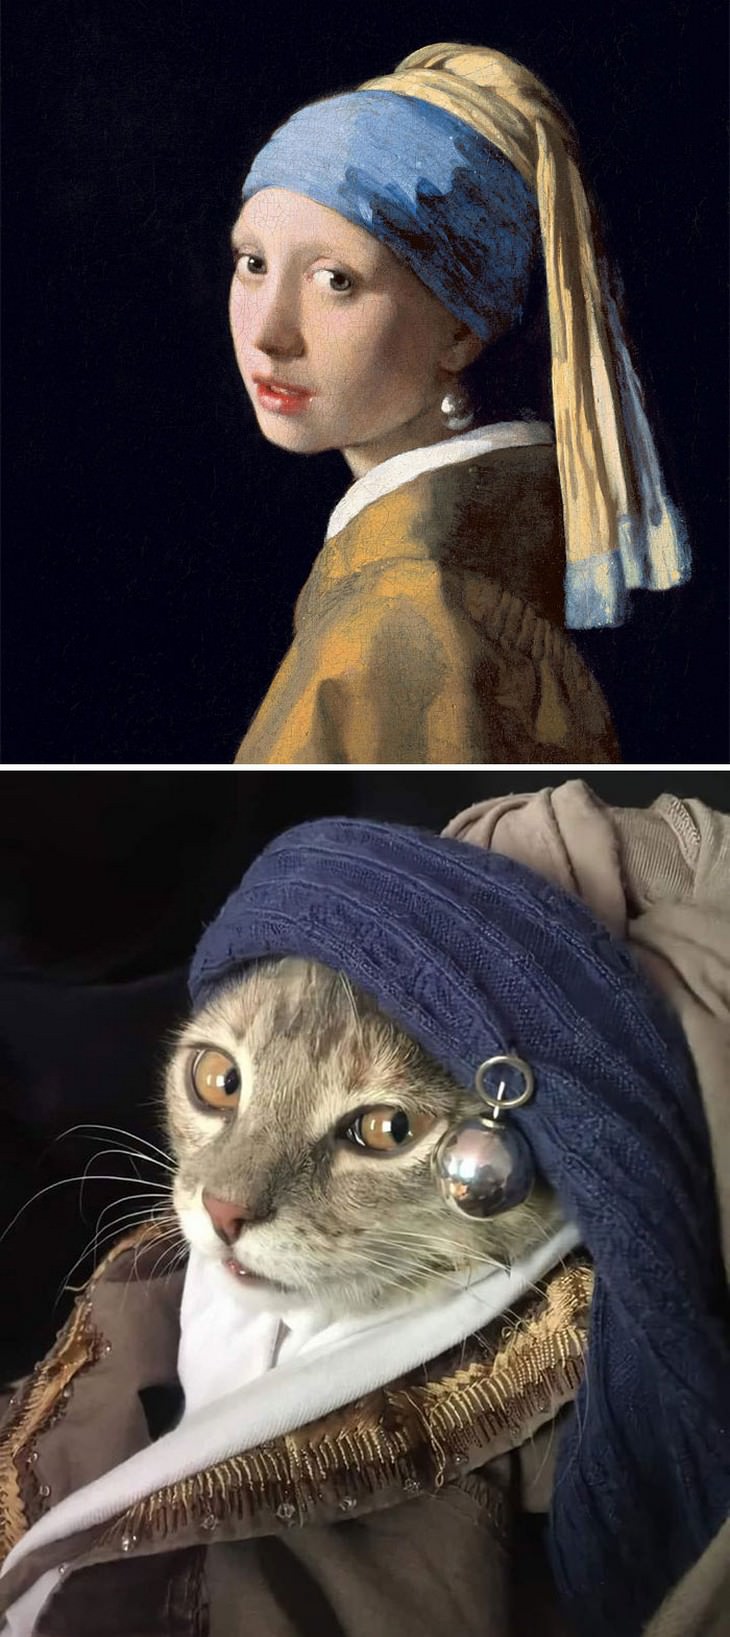 5. Girl with a Pearl Earring by Johannes Vermeer